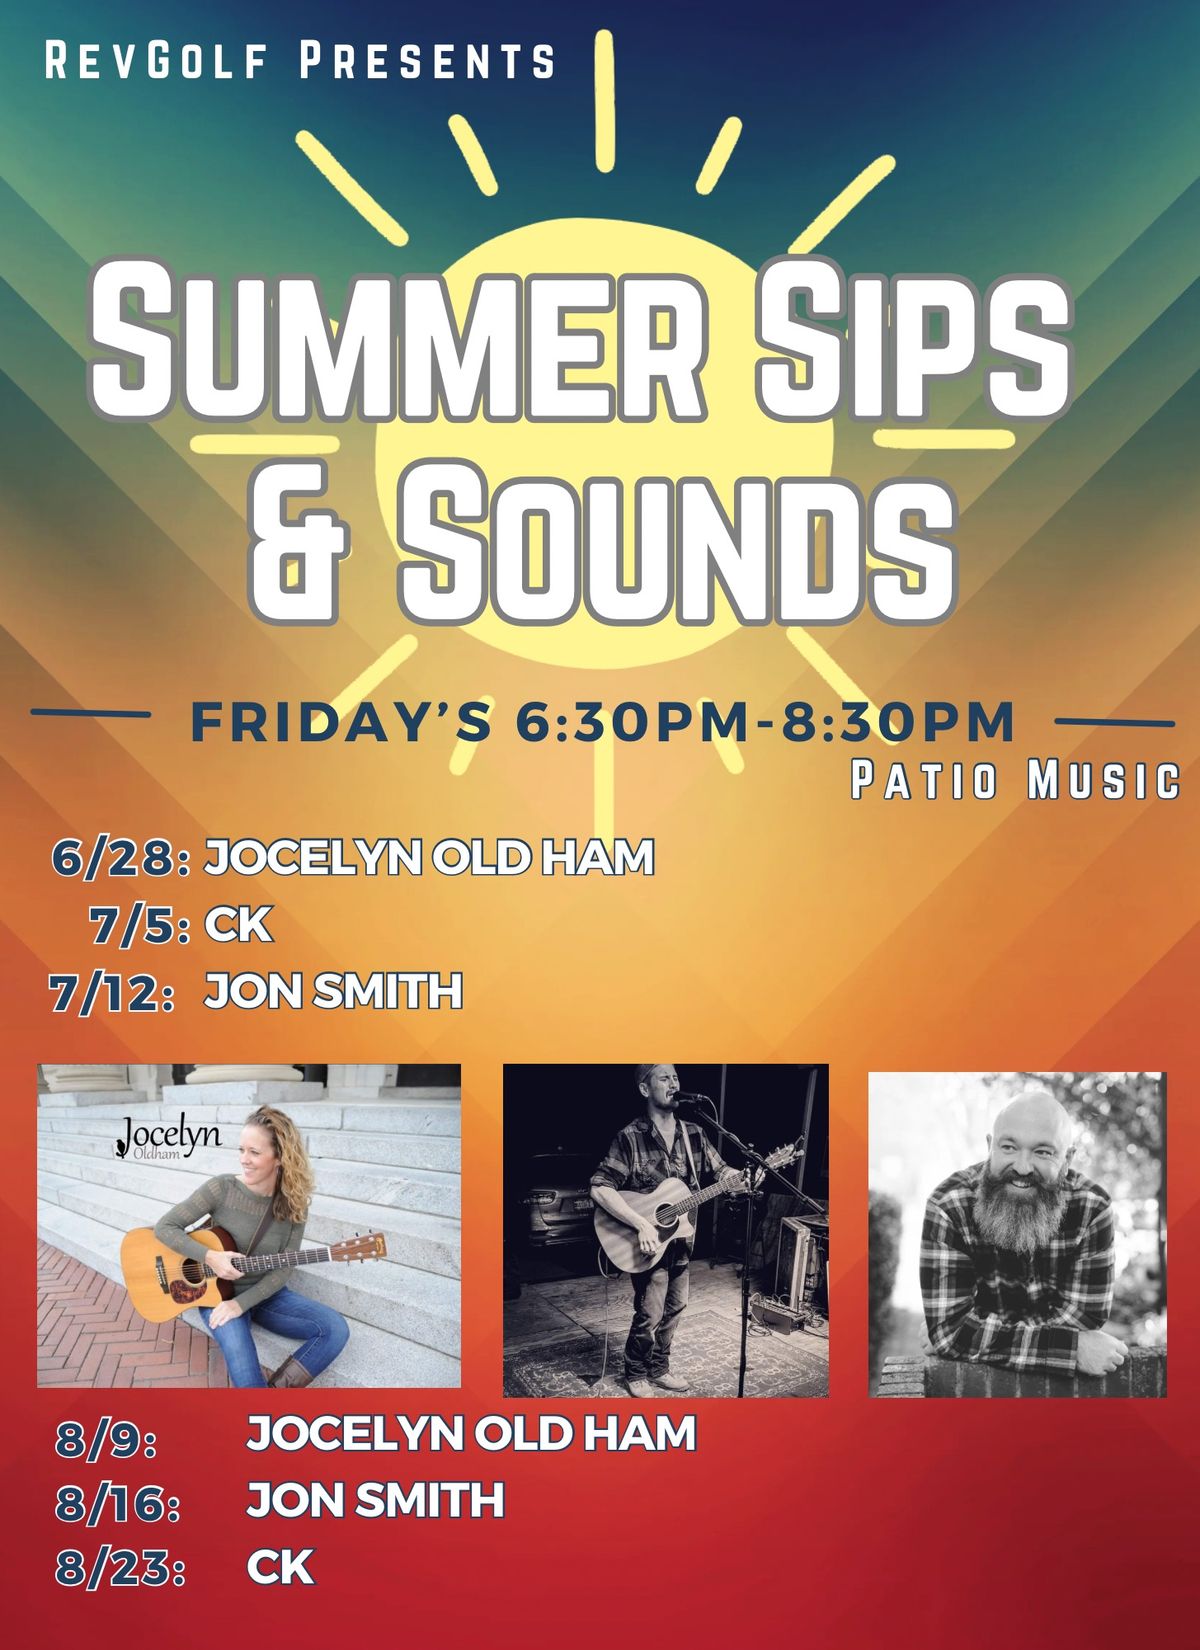 Live Music on the Patio with Jocelyn Oldham